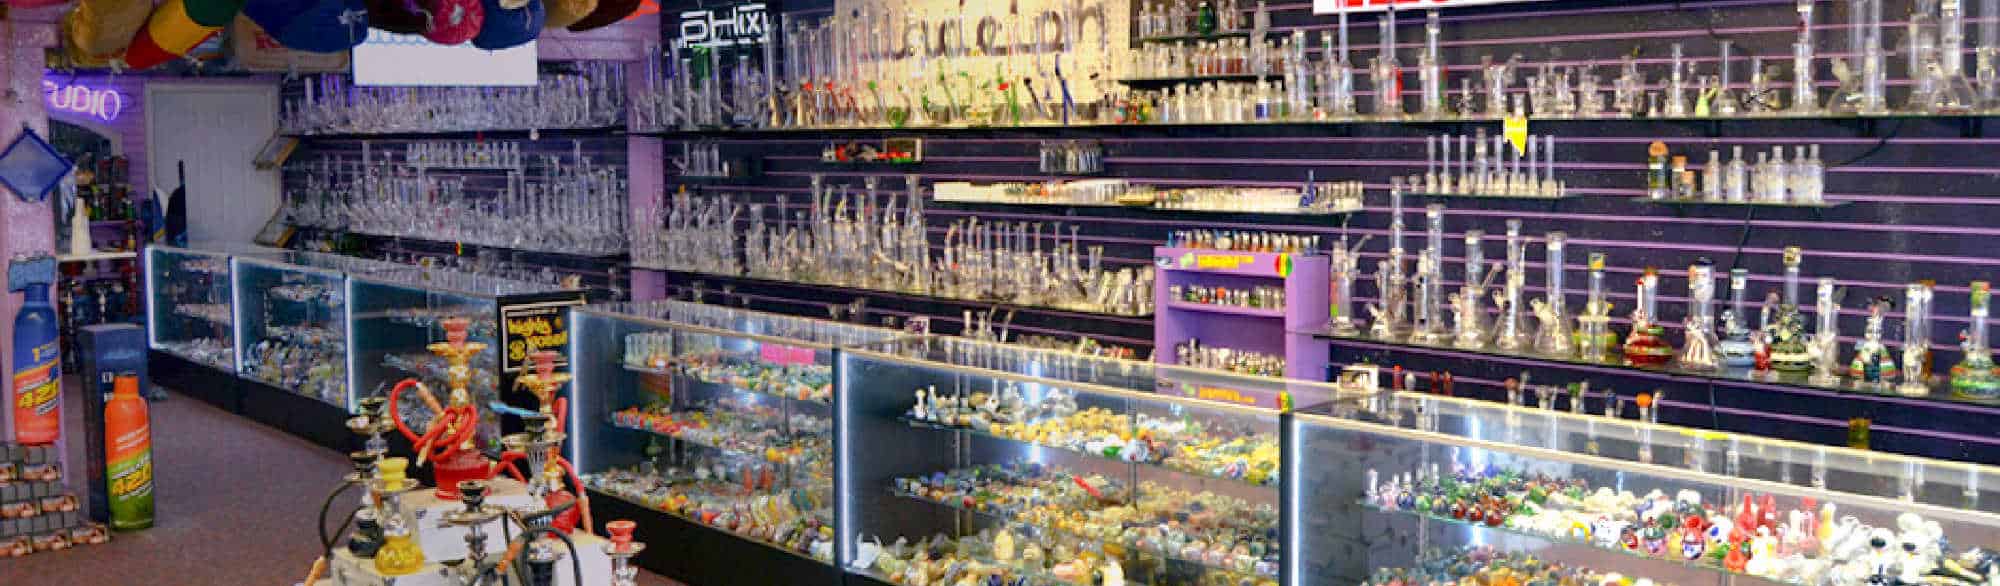 image of d's smoke shop & gift in henderson nv